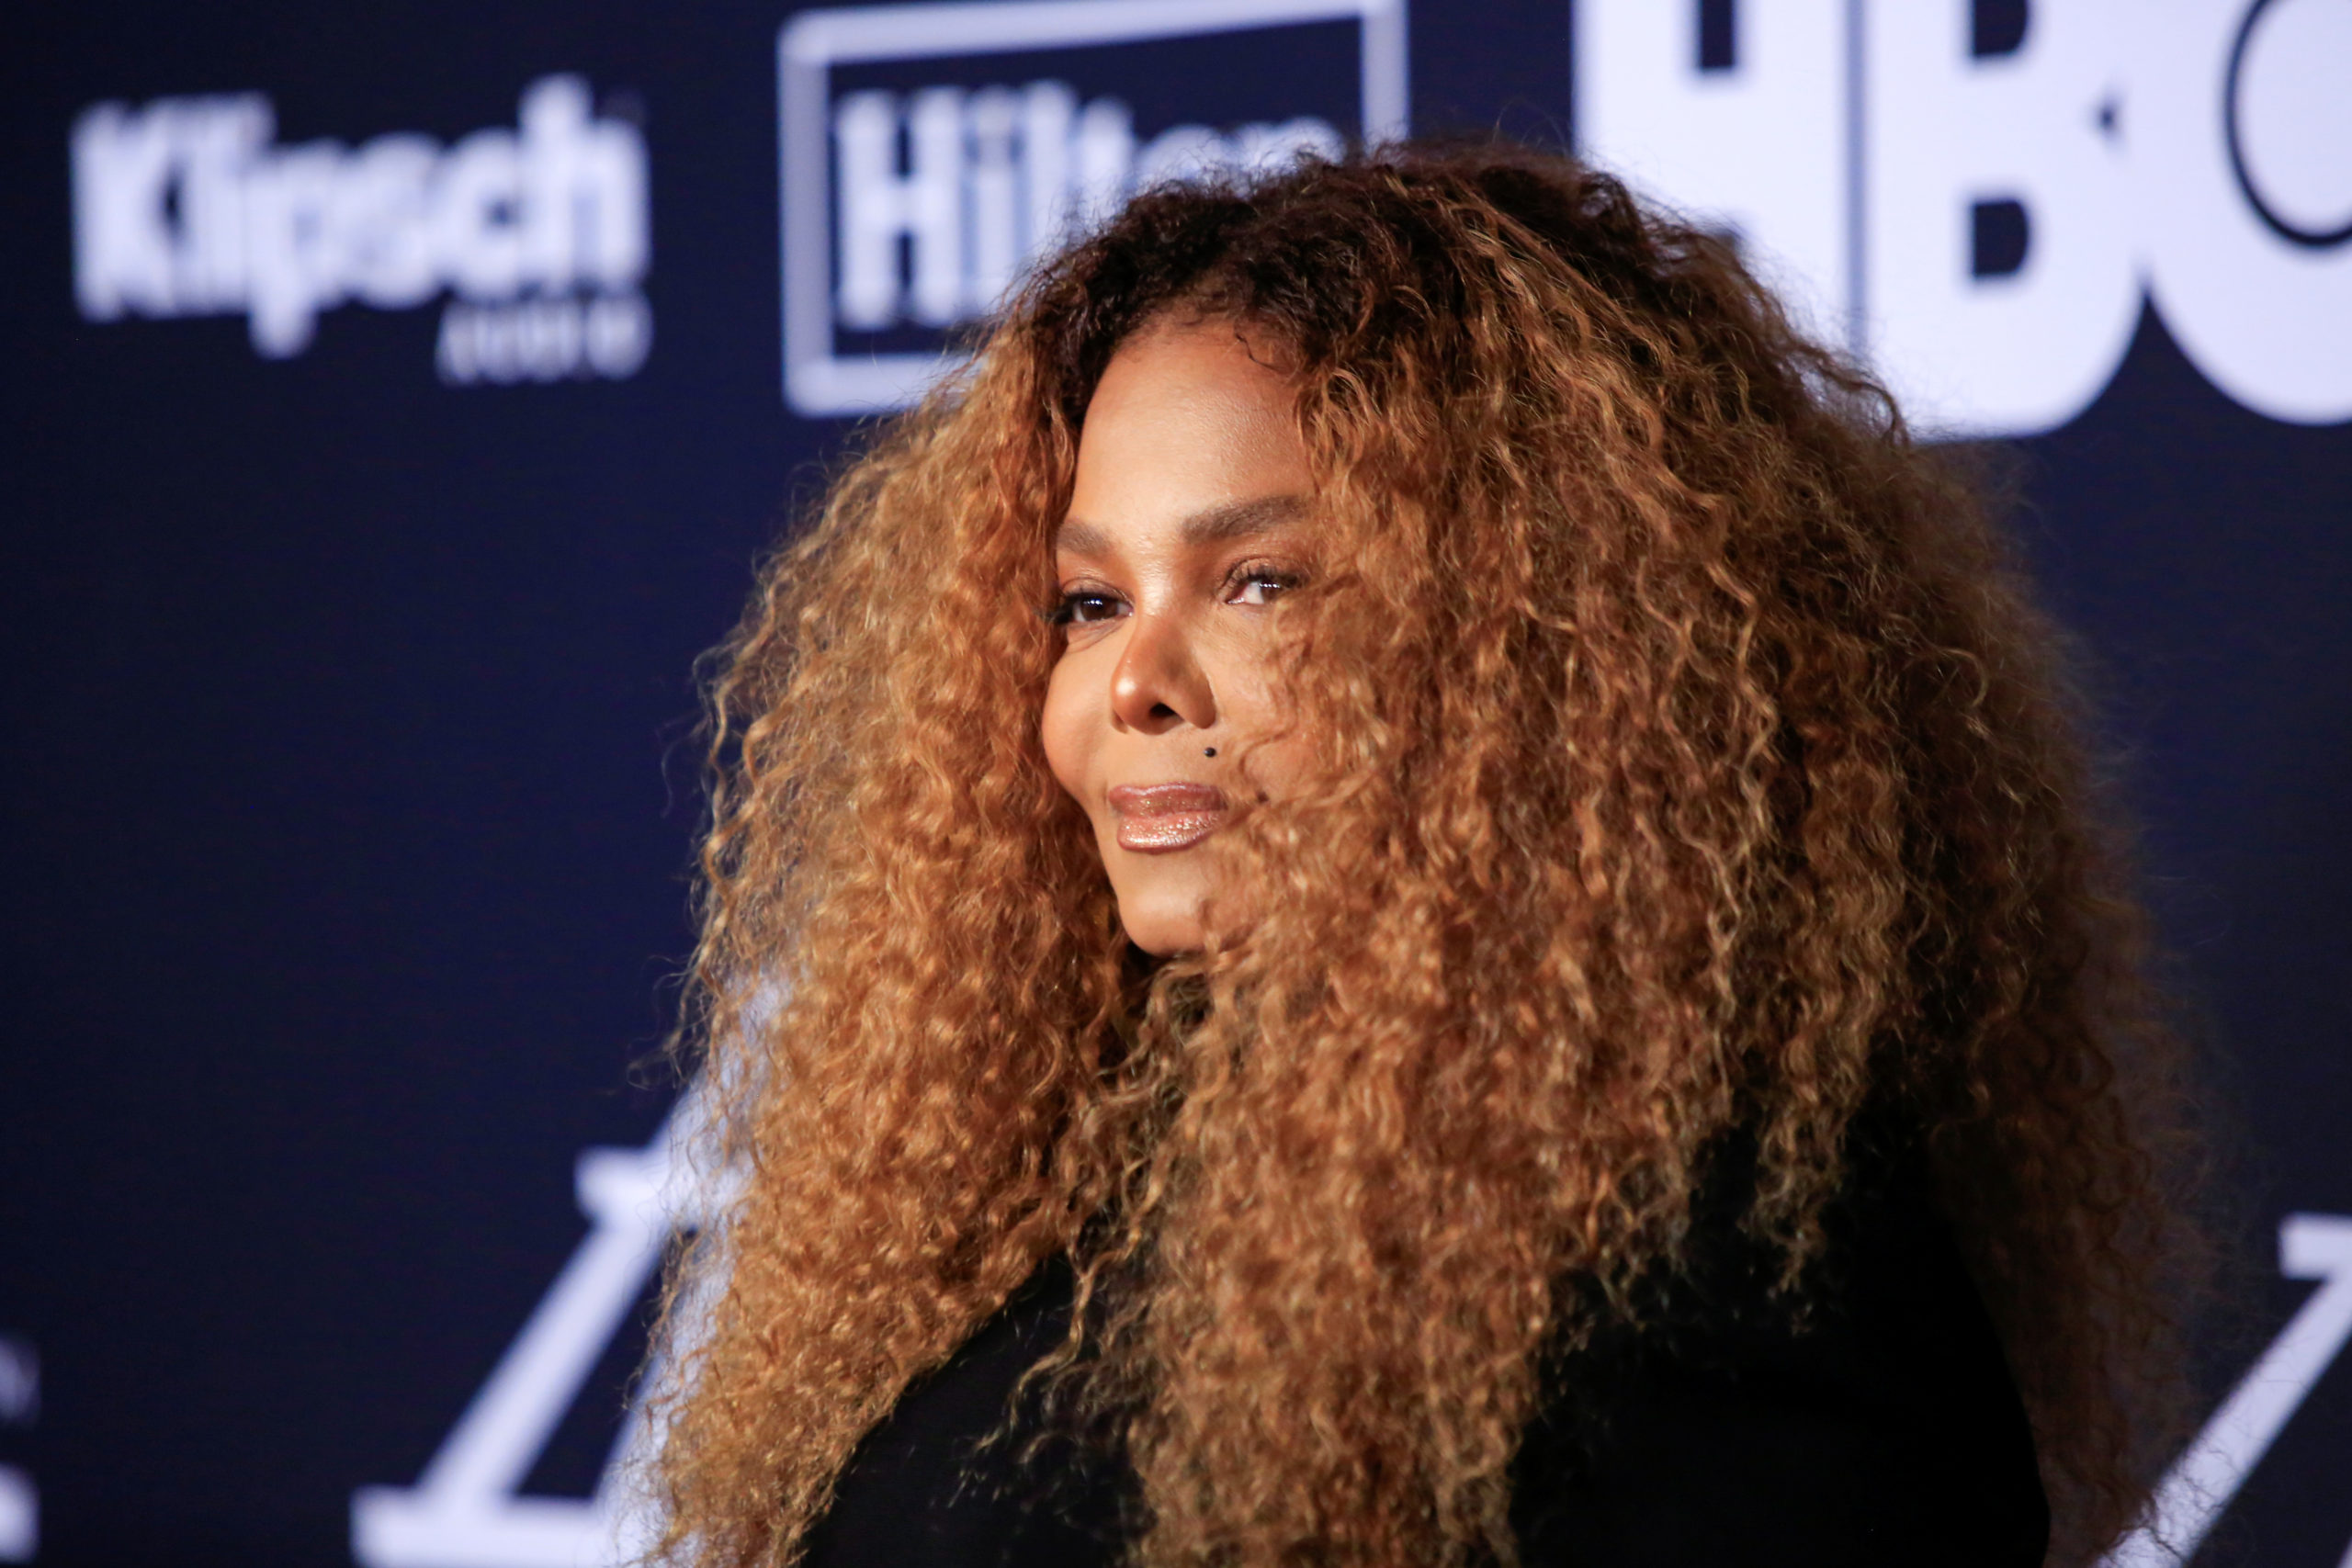 Inductee Janet Jackson attends the 2019 Rock and Roll Hall of Fame induction ceremony in Brooklyn, New York, U.S., March 29, 2019.  REUTERS/Mike Segar